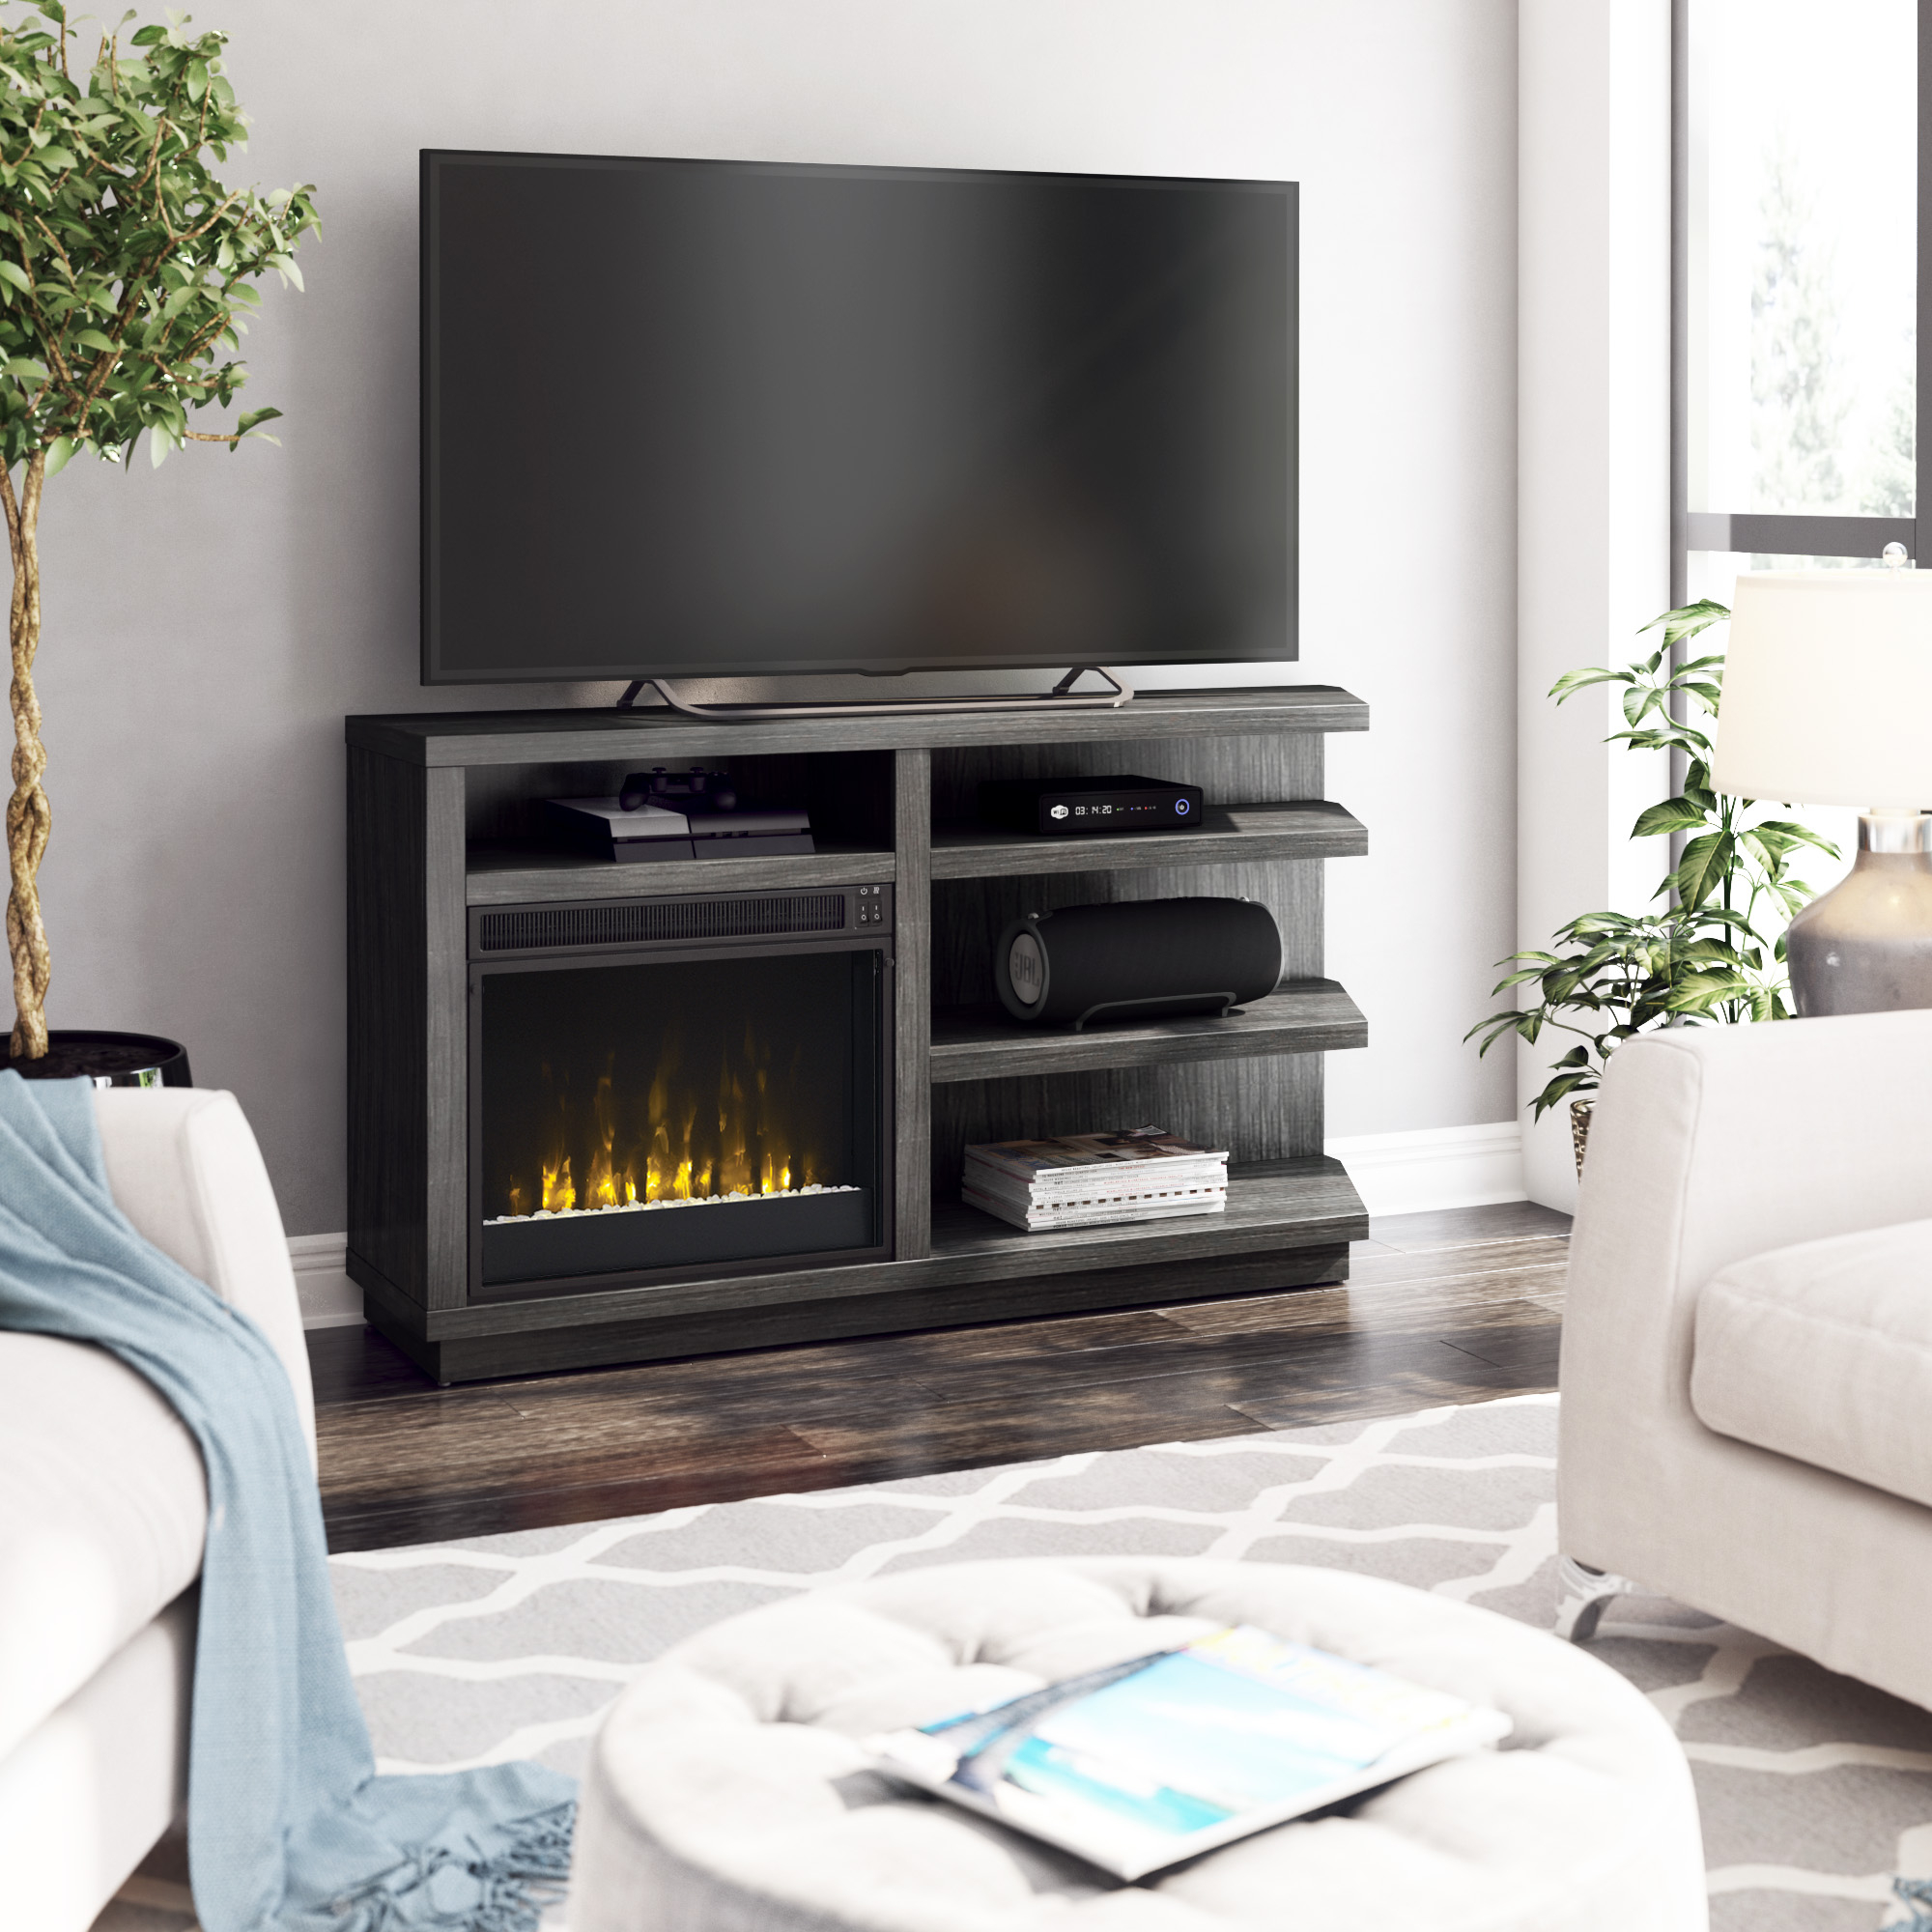 Blytheswood TV Stand for TVs up to 65" with Electric Fireplace Included